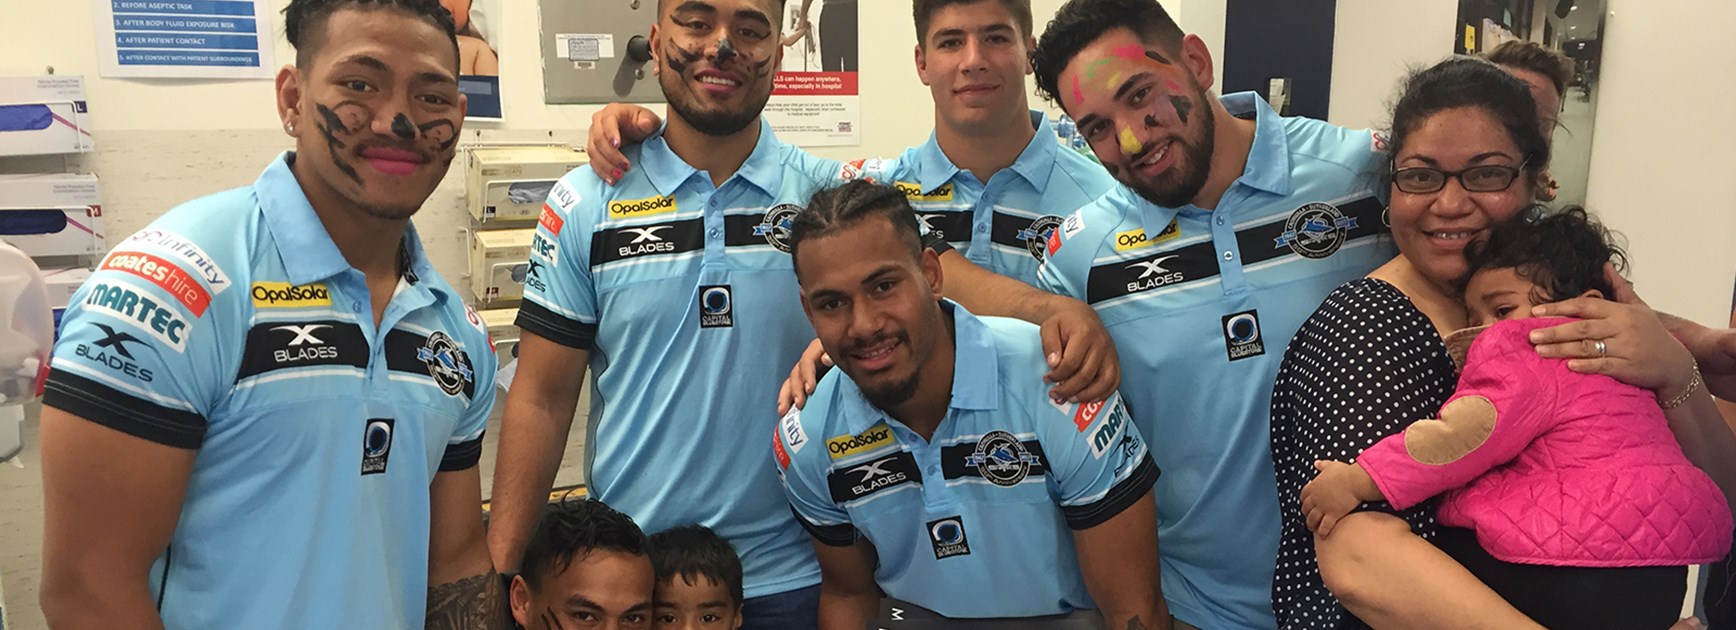 Sharks give back to community